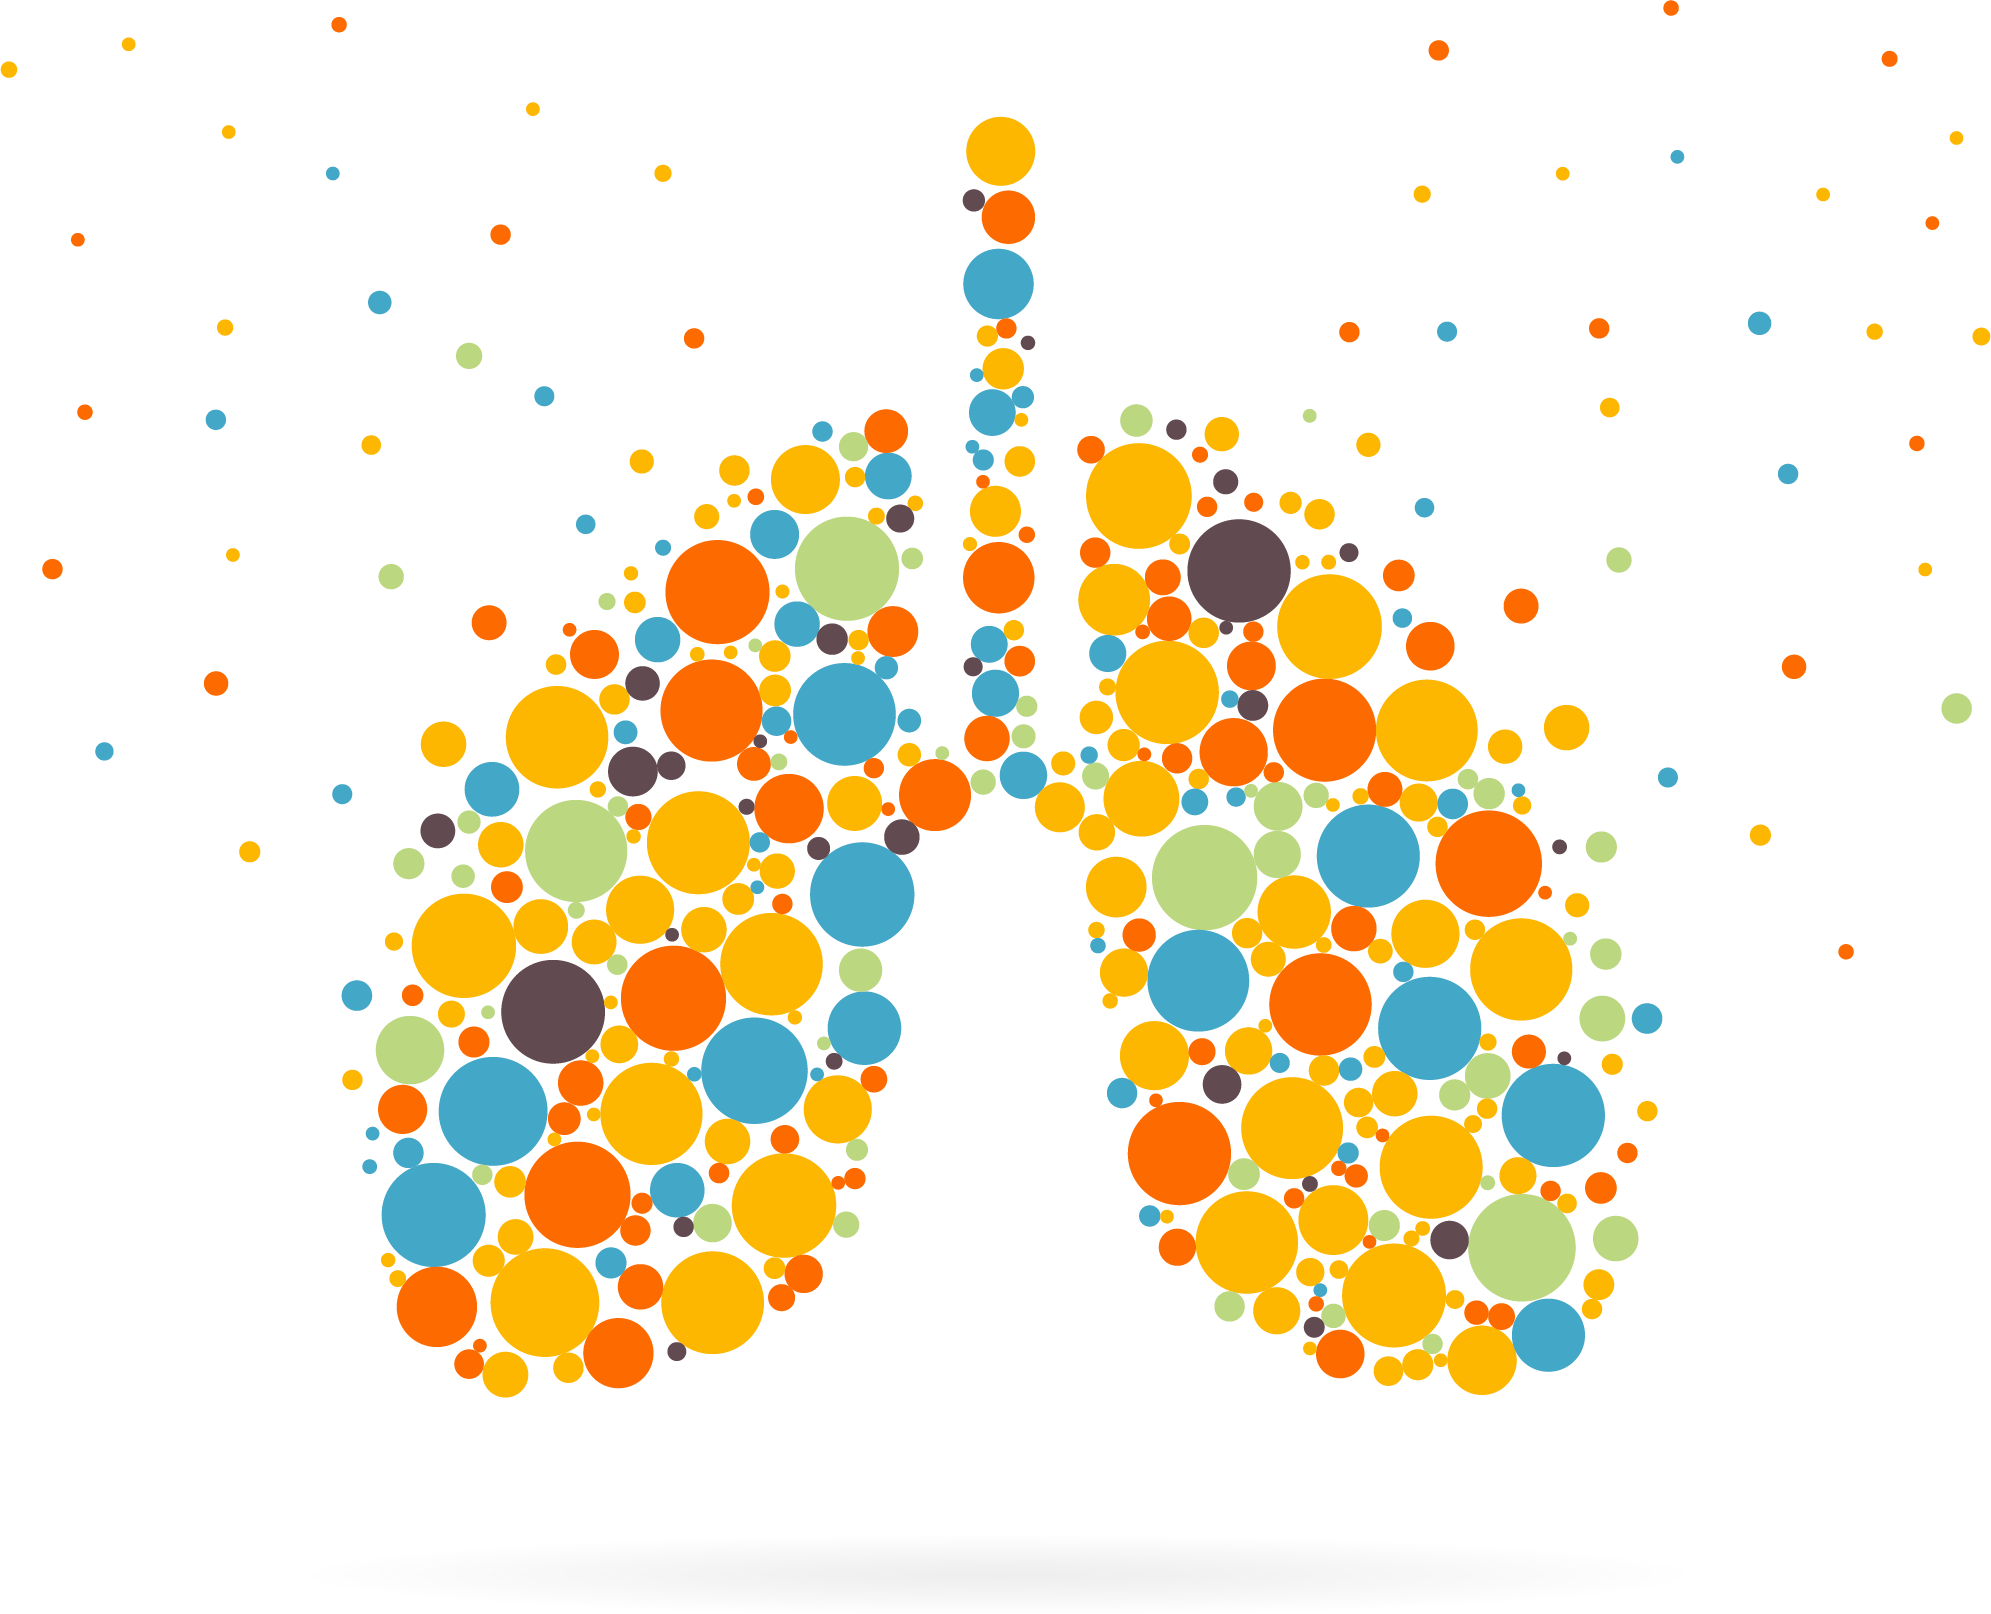 cough clipart damaged lung